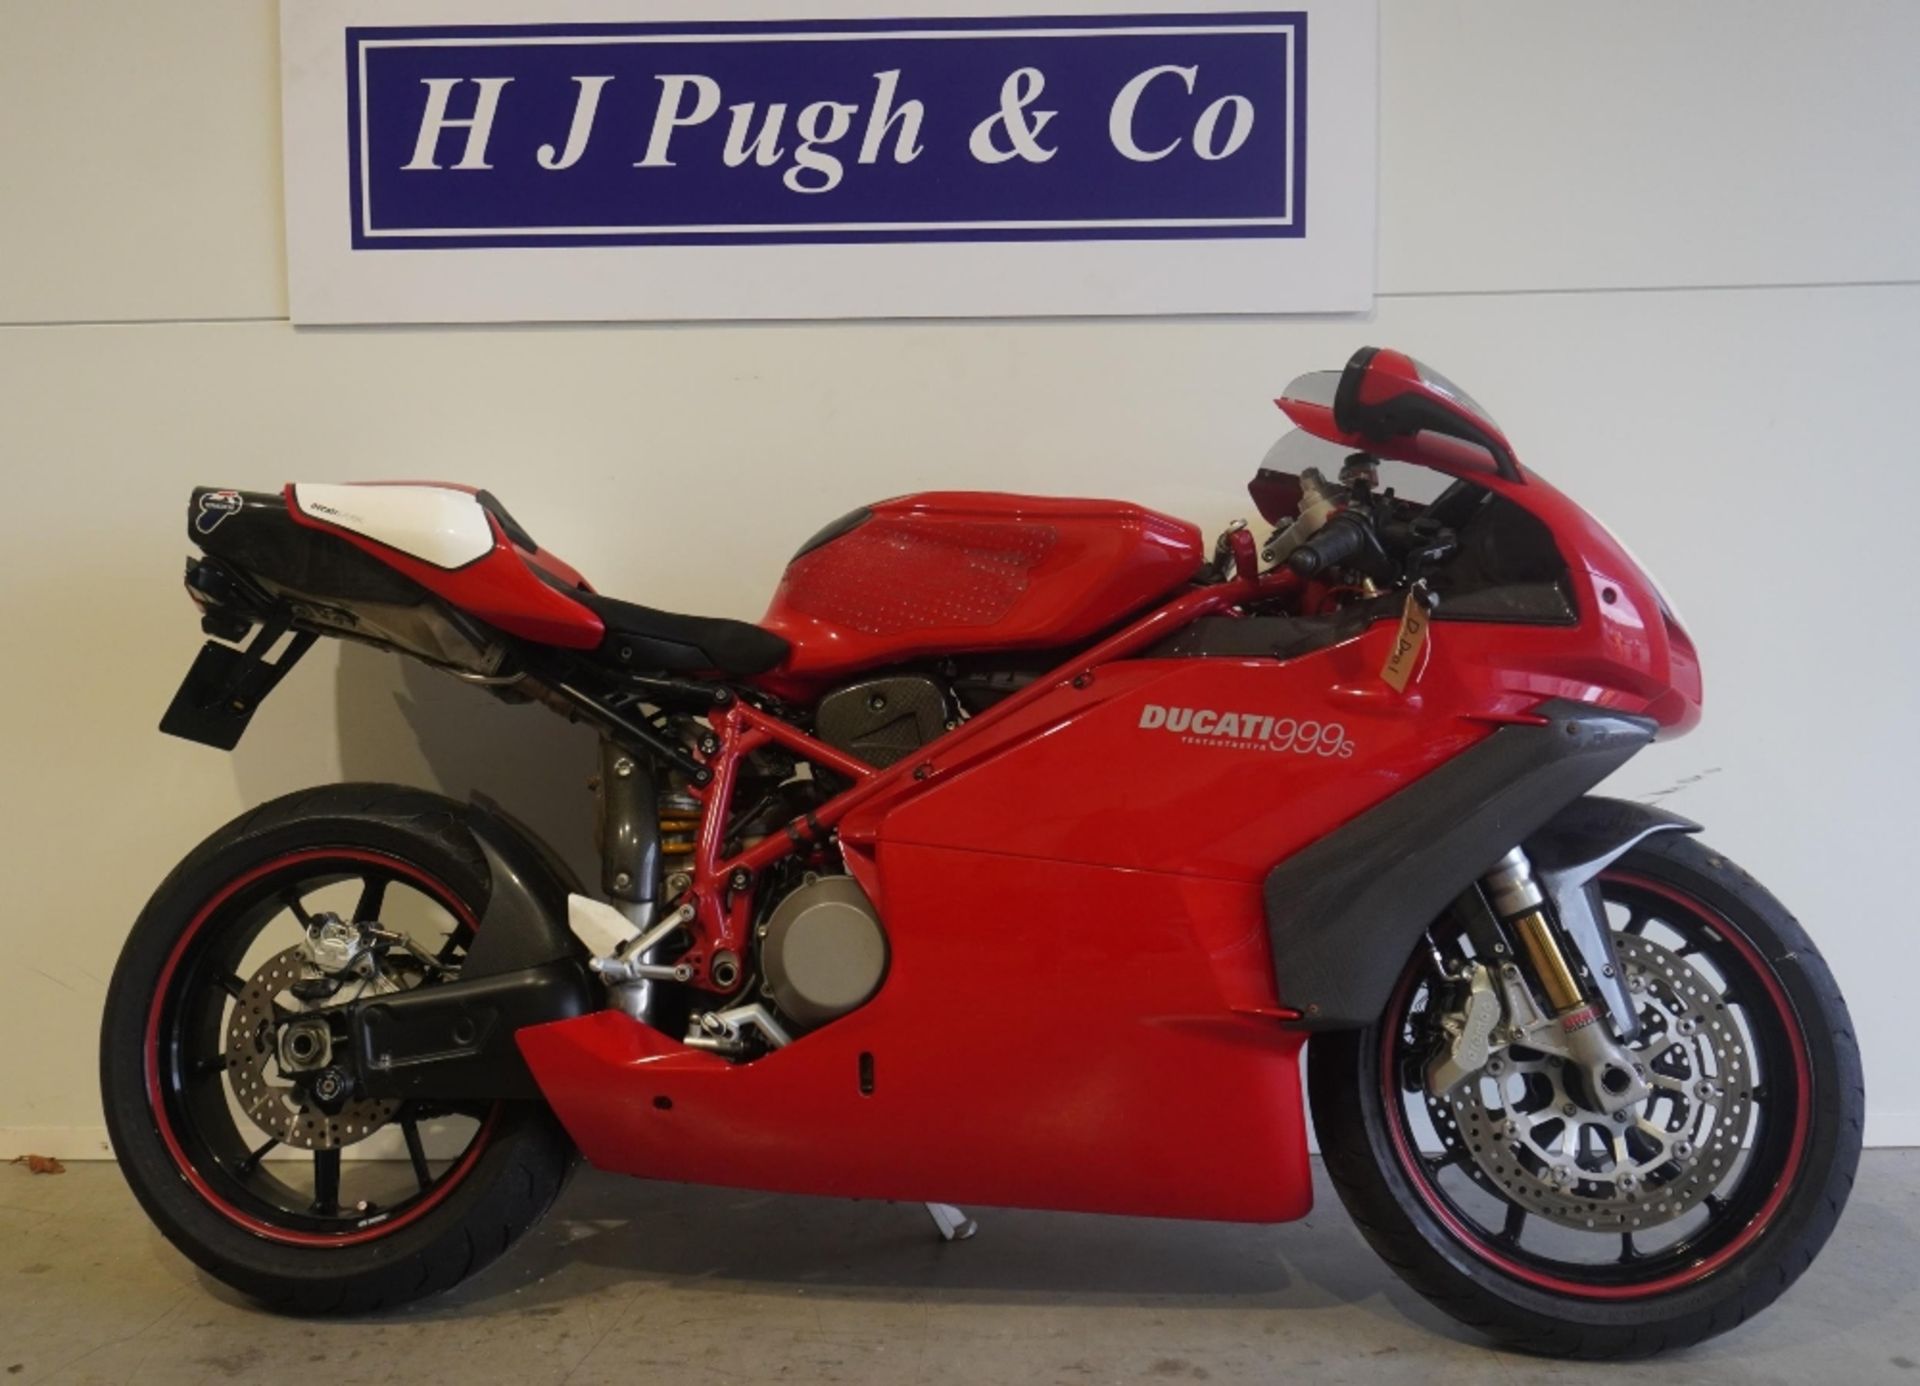 Ducati 999s motorcycle. 2005. 998cc. Runs but needs new battery. Comes with folder of history and